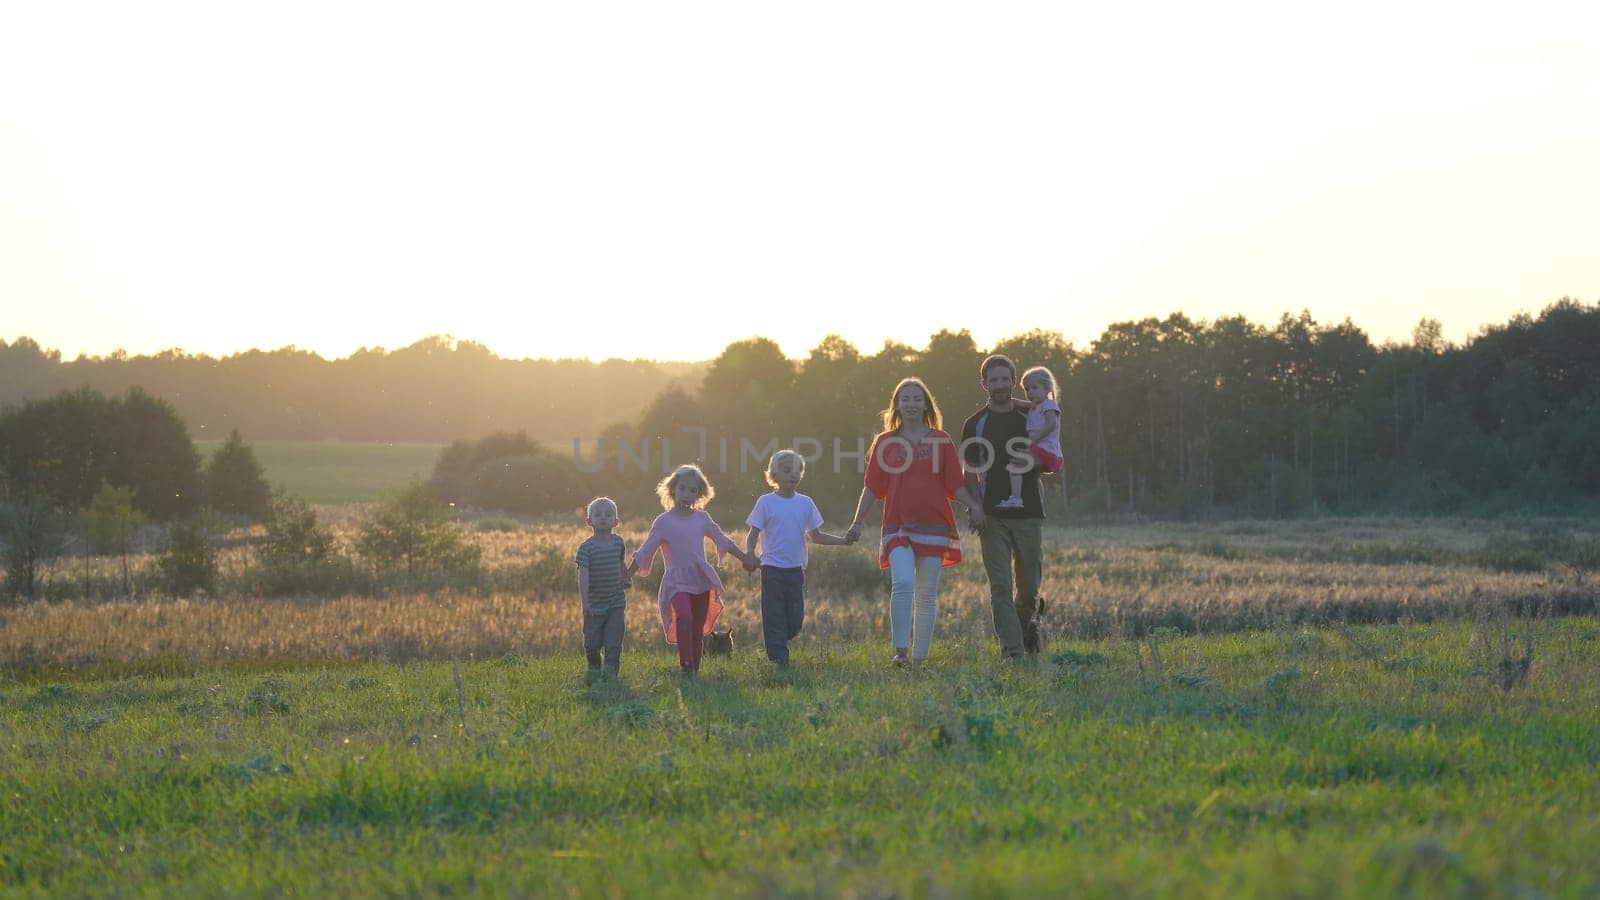 A large friendly family walks across the field at sunset